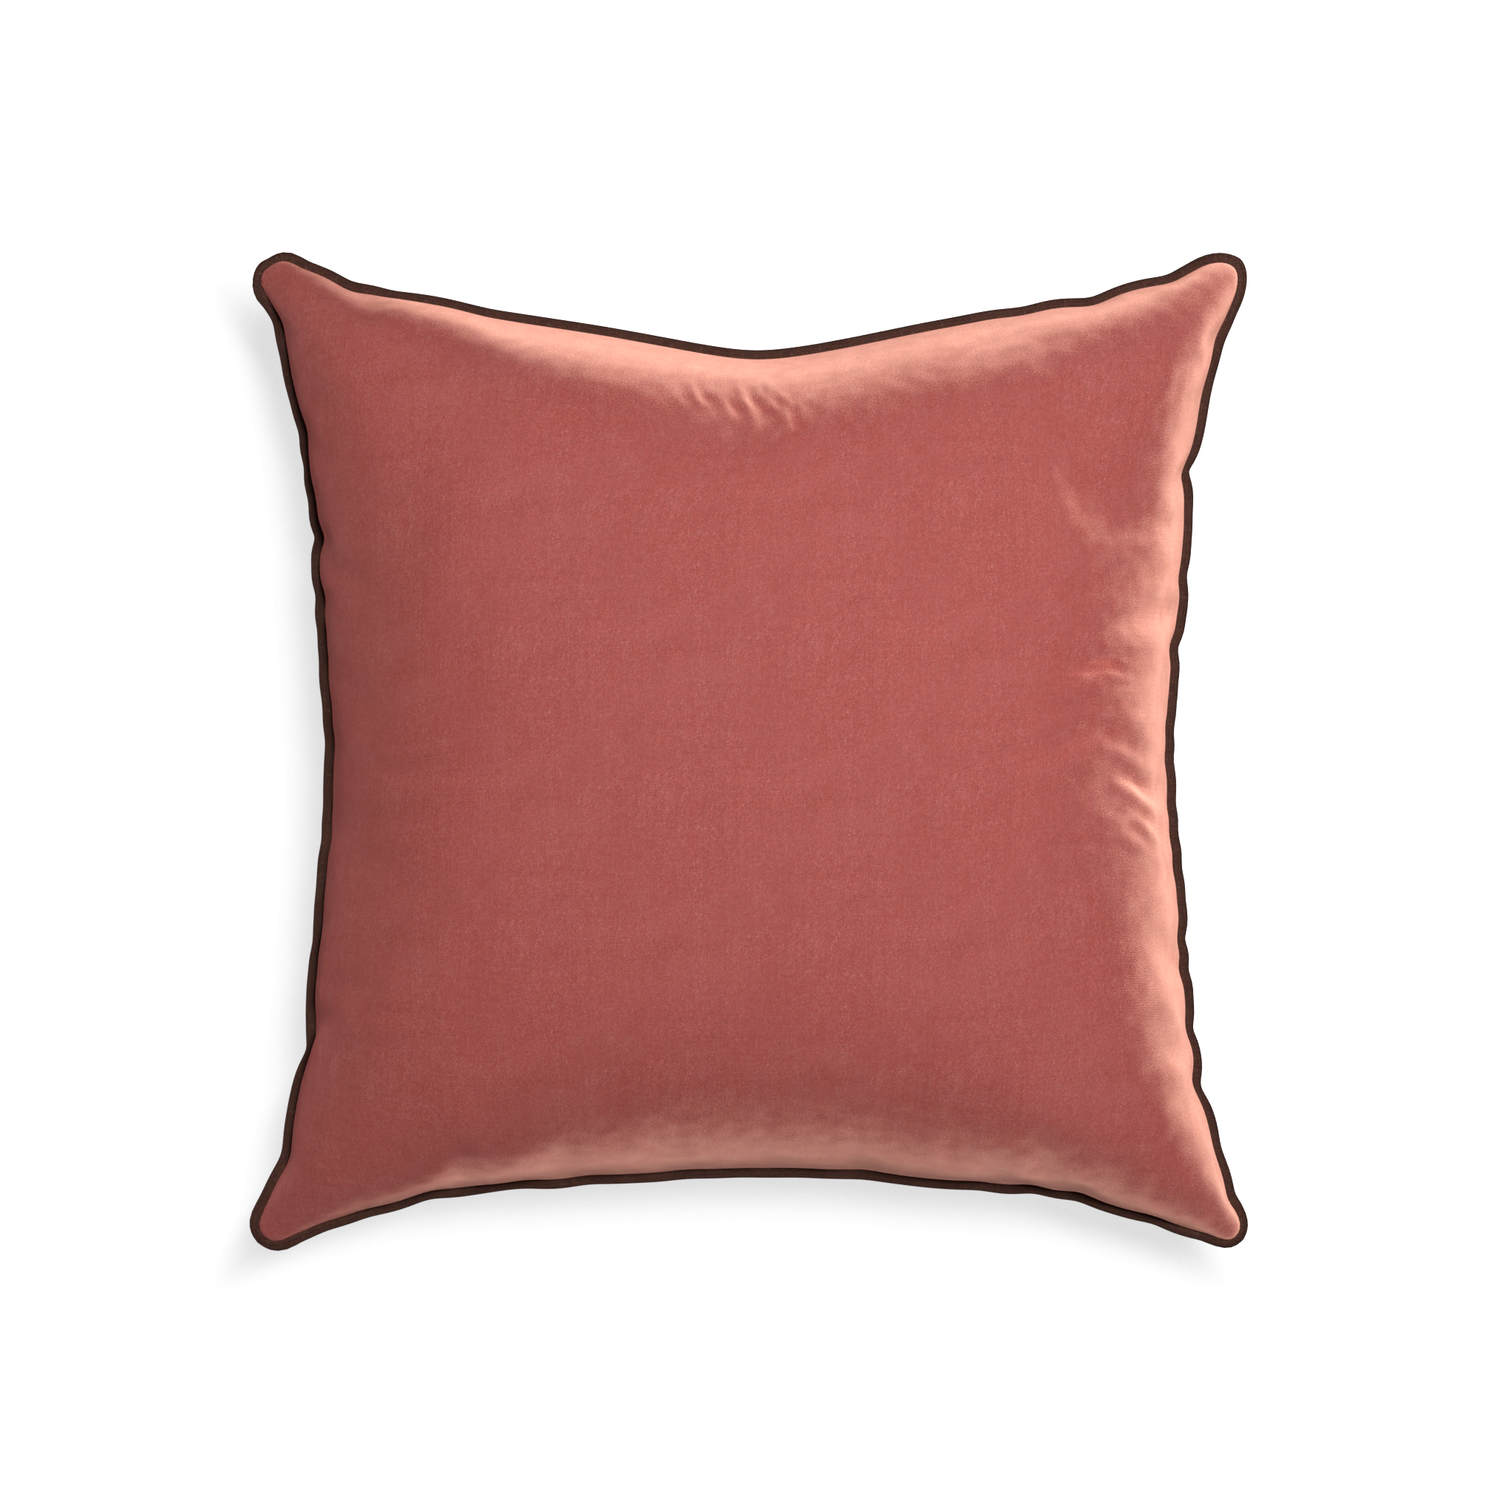 22-square cosmo velvet custom coralpillow with w piping on white background